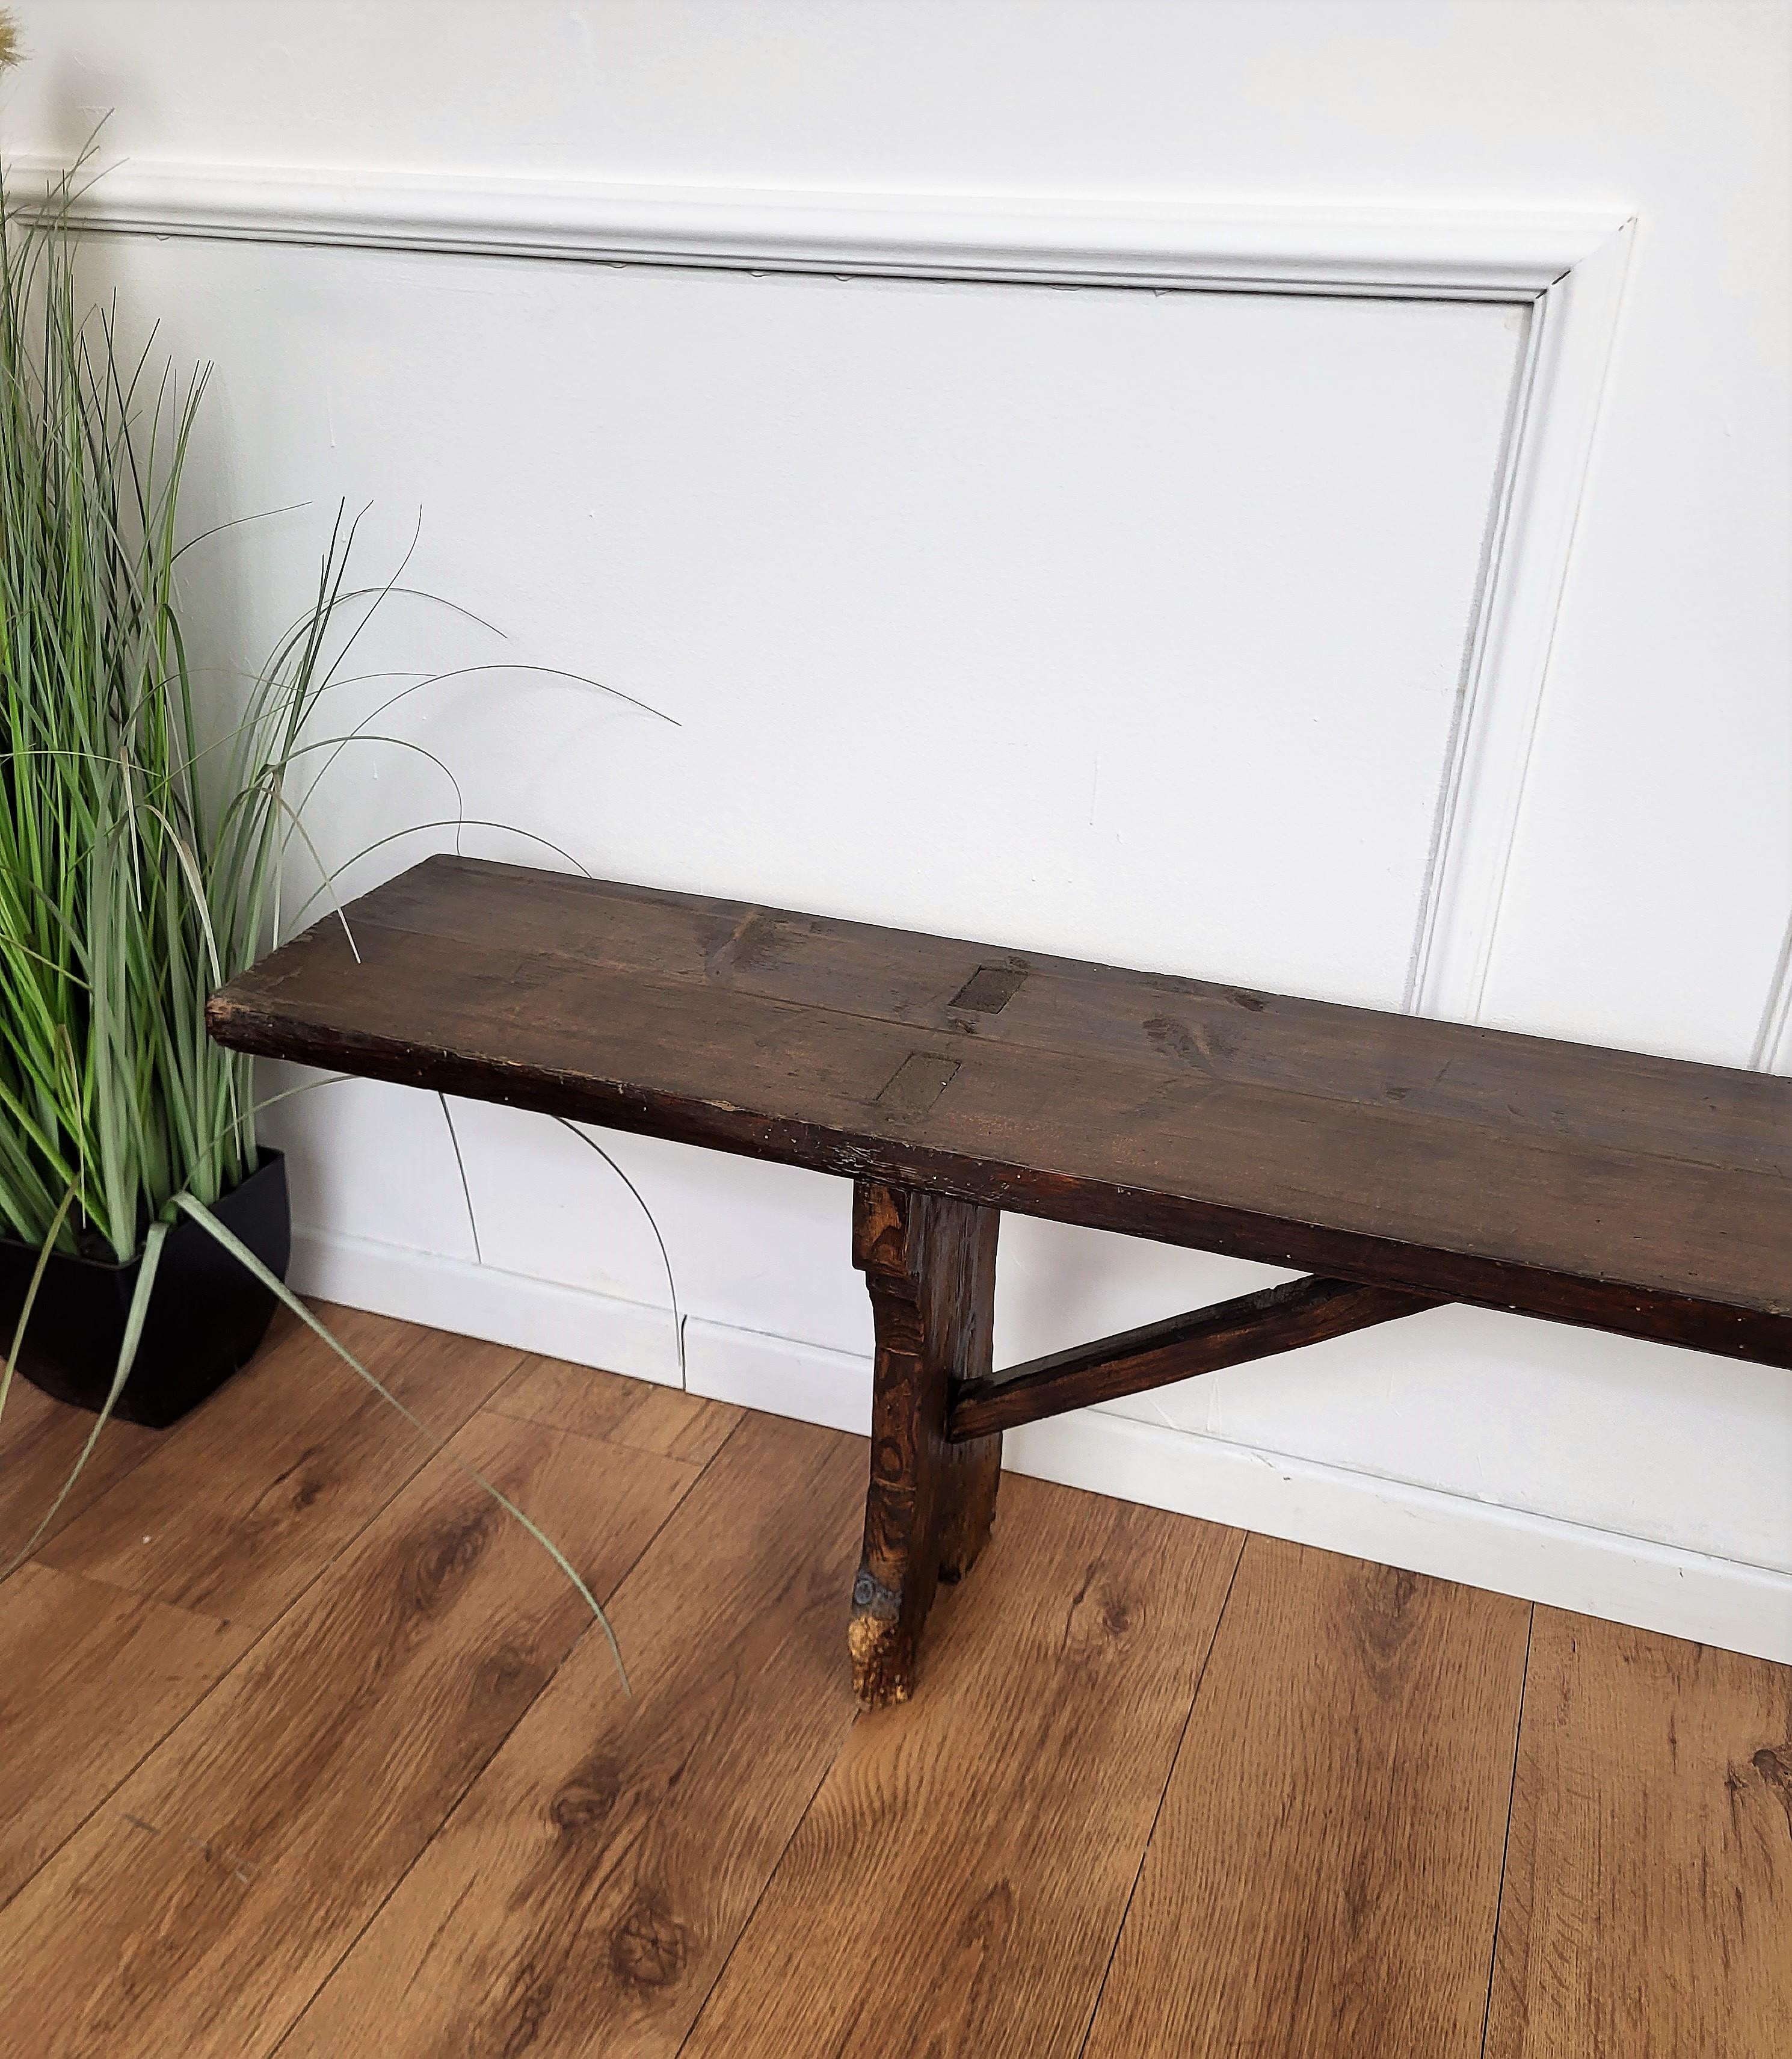 20th Century Primitive Rustic Minimal Italian Midcentury Wooden Coffee Table Bench Stool For Sale